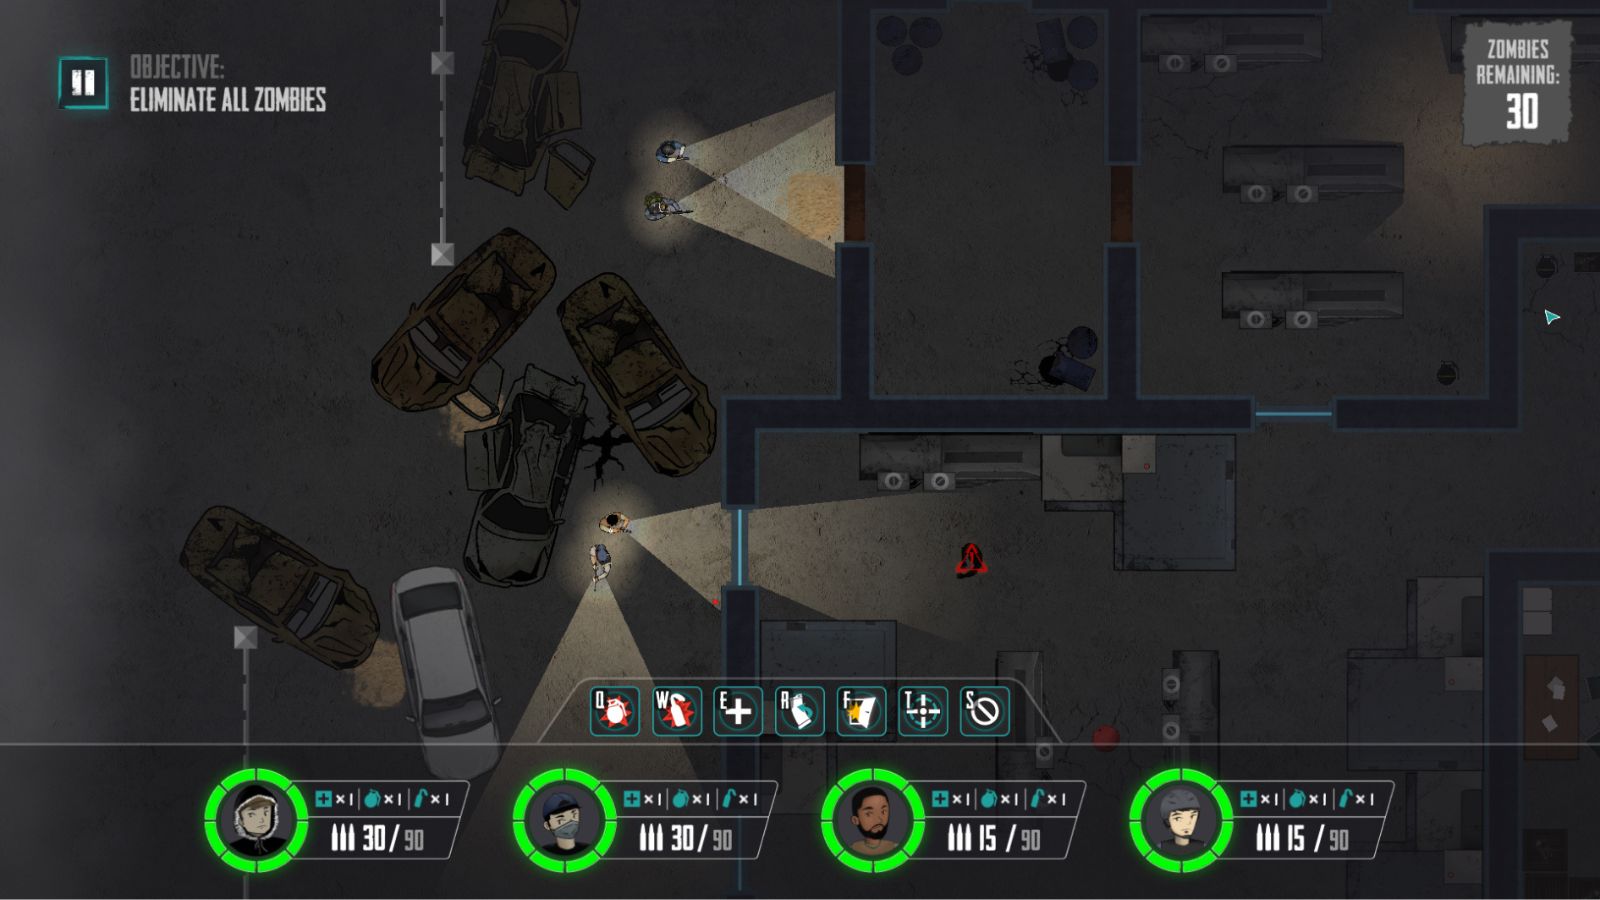 Two teams of players approach different doors to a building with flashlights.